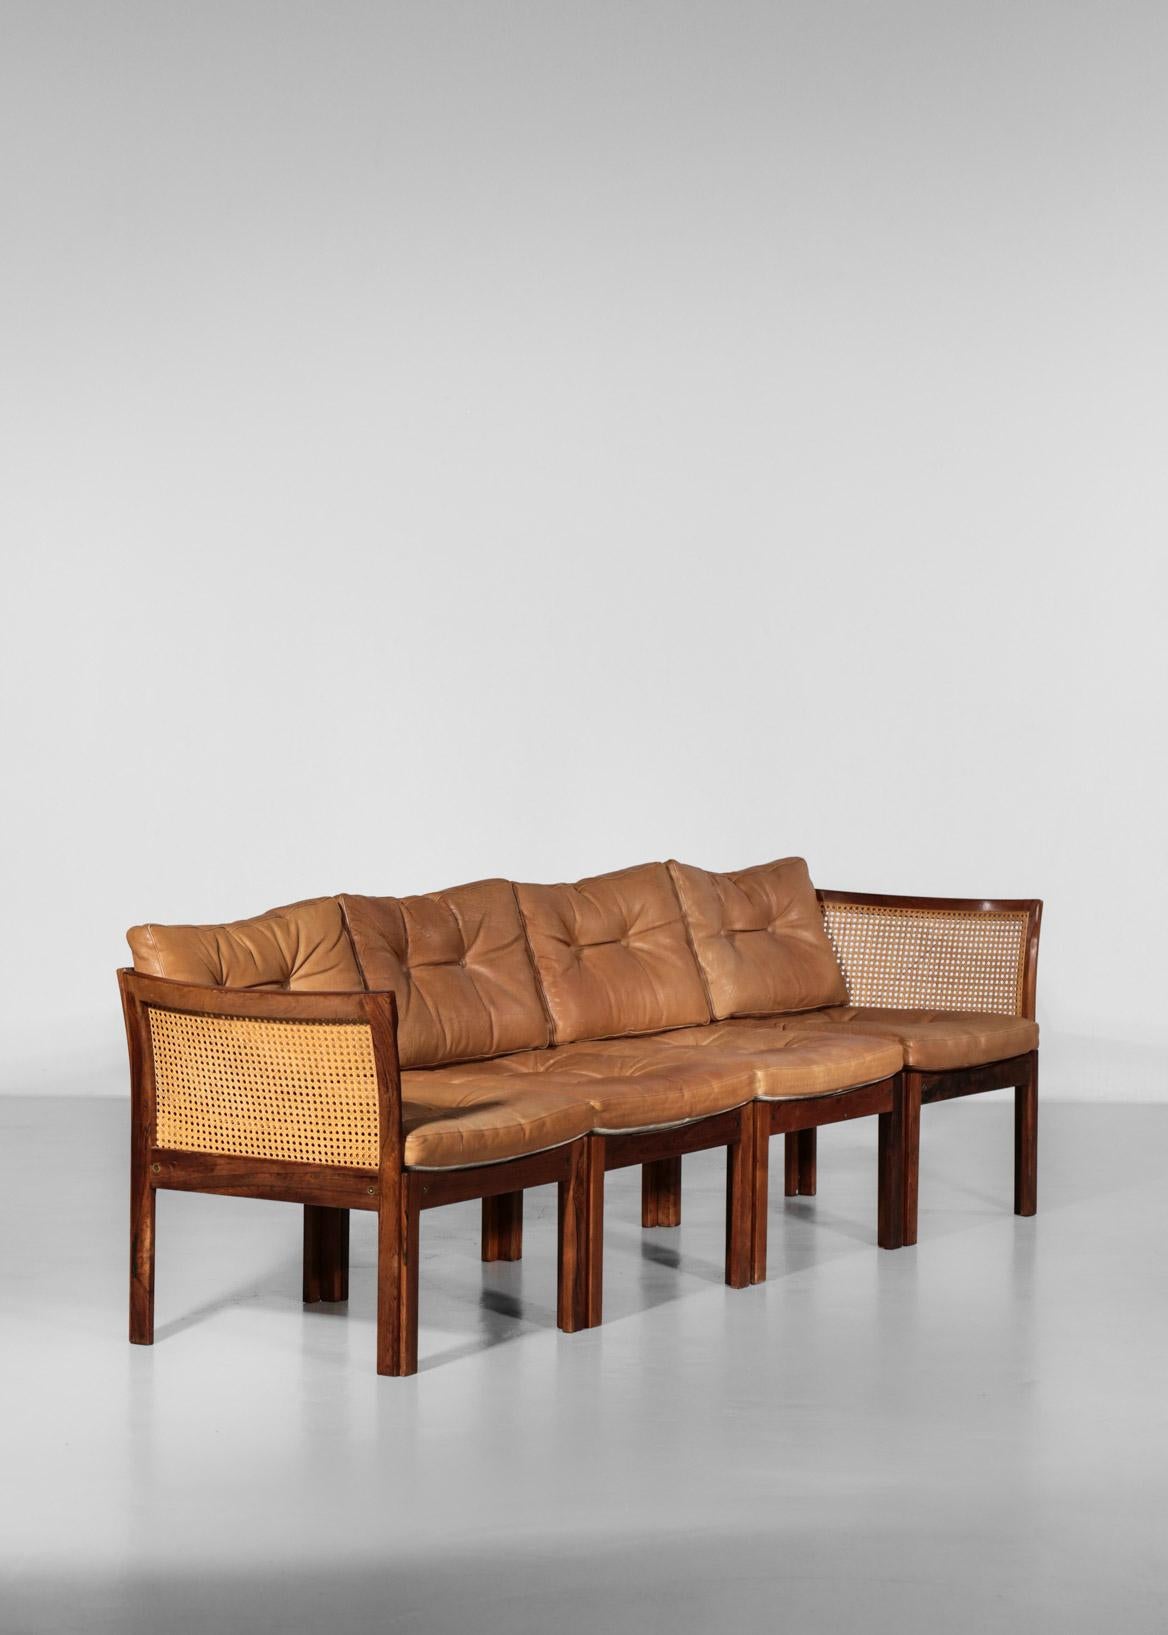 Illum Wikkelso Leather Sofa in Rosewood and Woven Rattan Cane For Sale 13